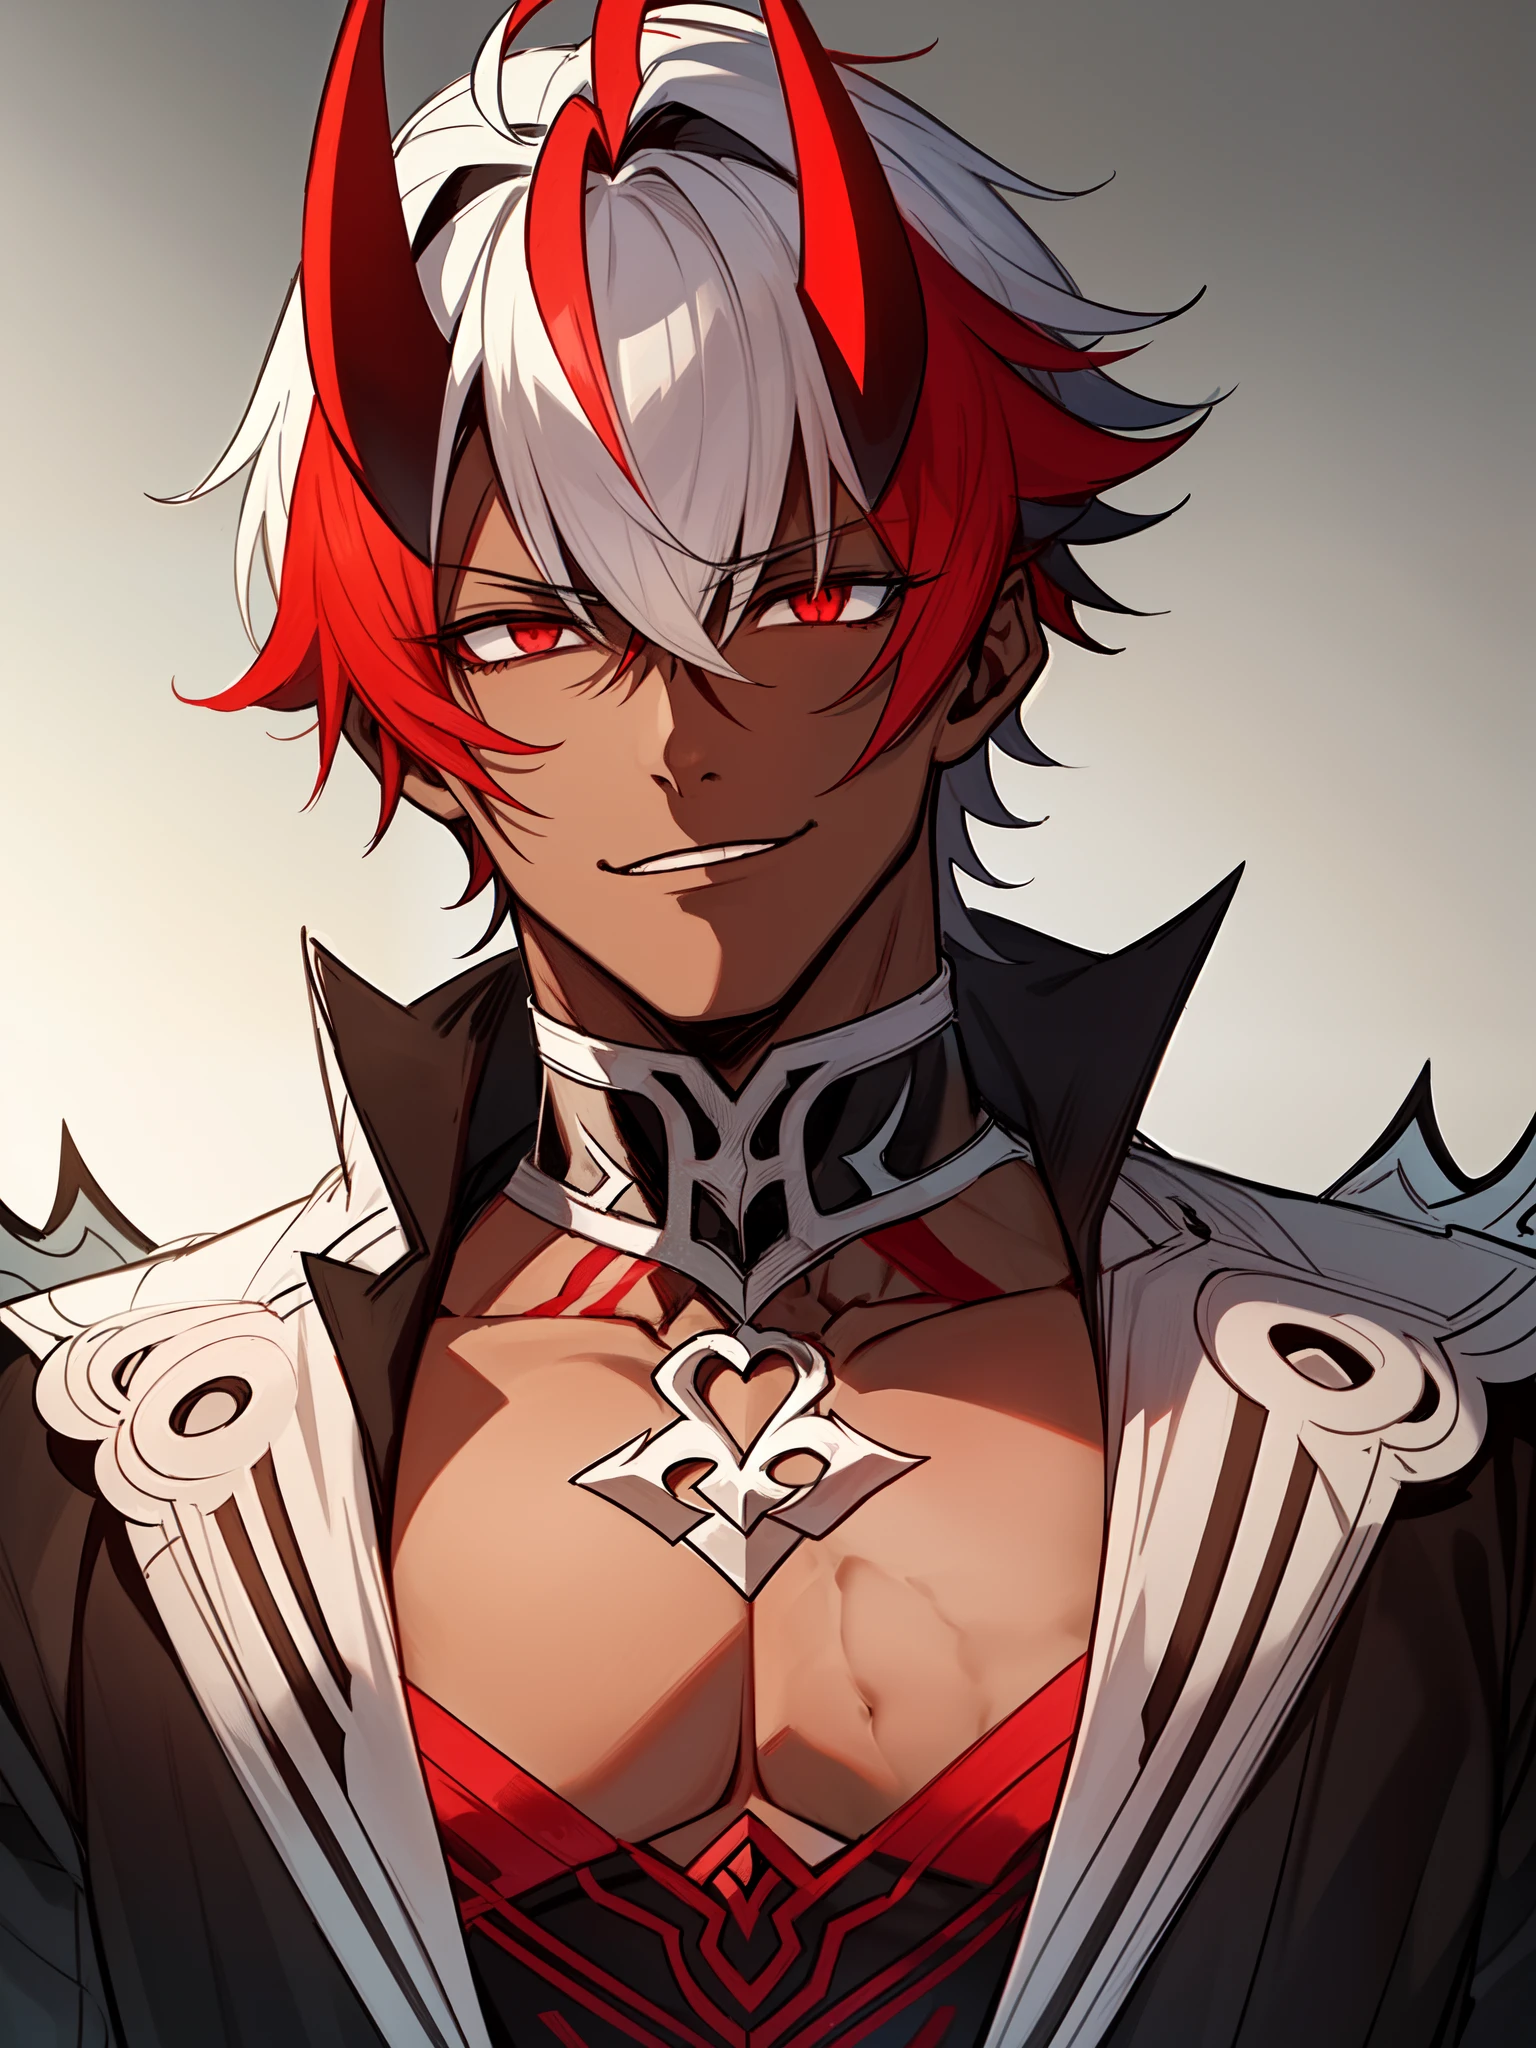 "Stunningly detailed anime sketch of a solo ((muscular)) ((handsome)) ((dark-skinned)) demon boy with short white hair and red eyes. He exudes maturity and has striking red and black crown-like horns. Dressed in demonic fantasy clothes, including a black capelet and a red and black demonic aura, he resembles a dark prince."